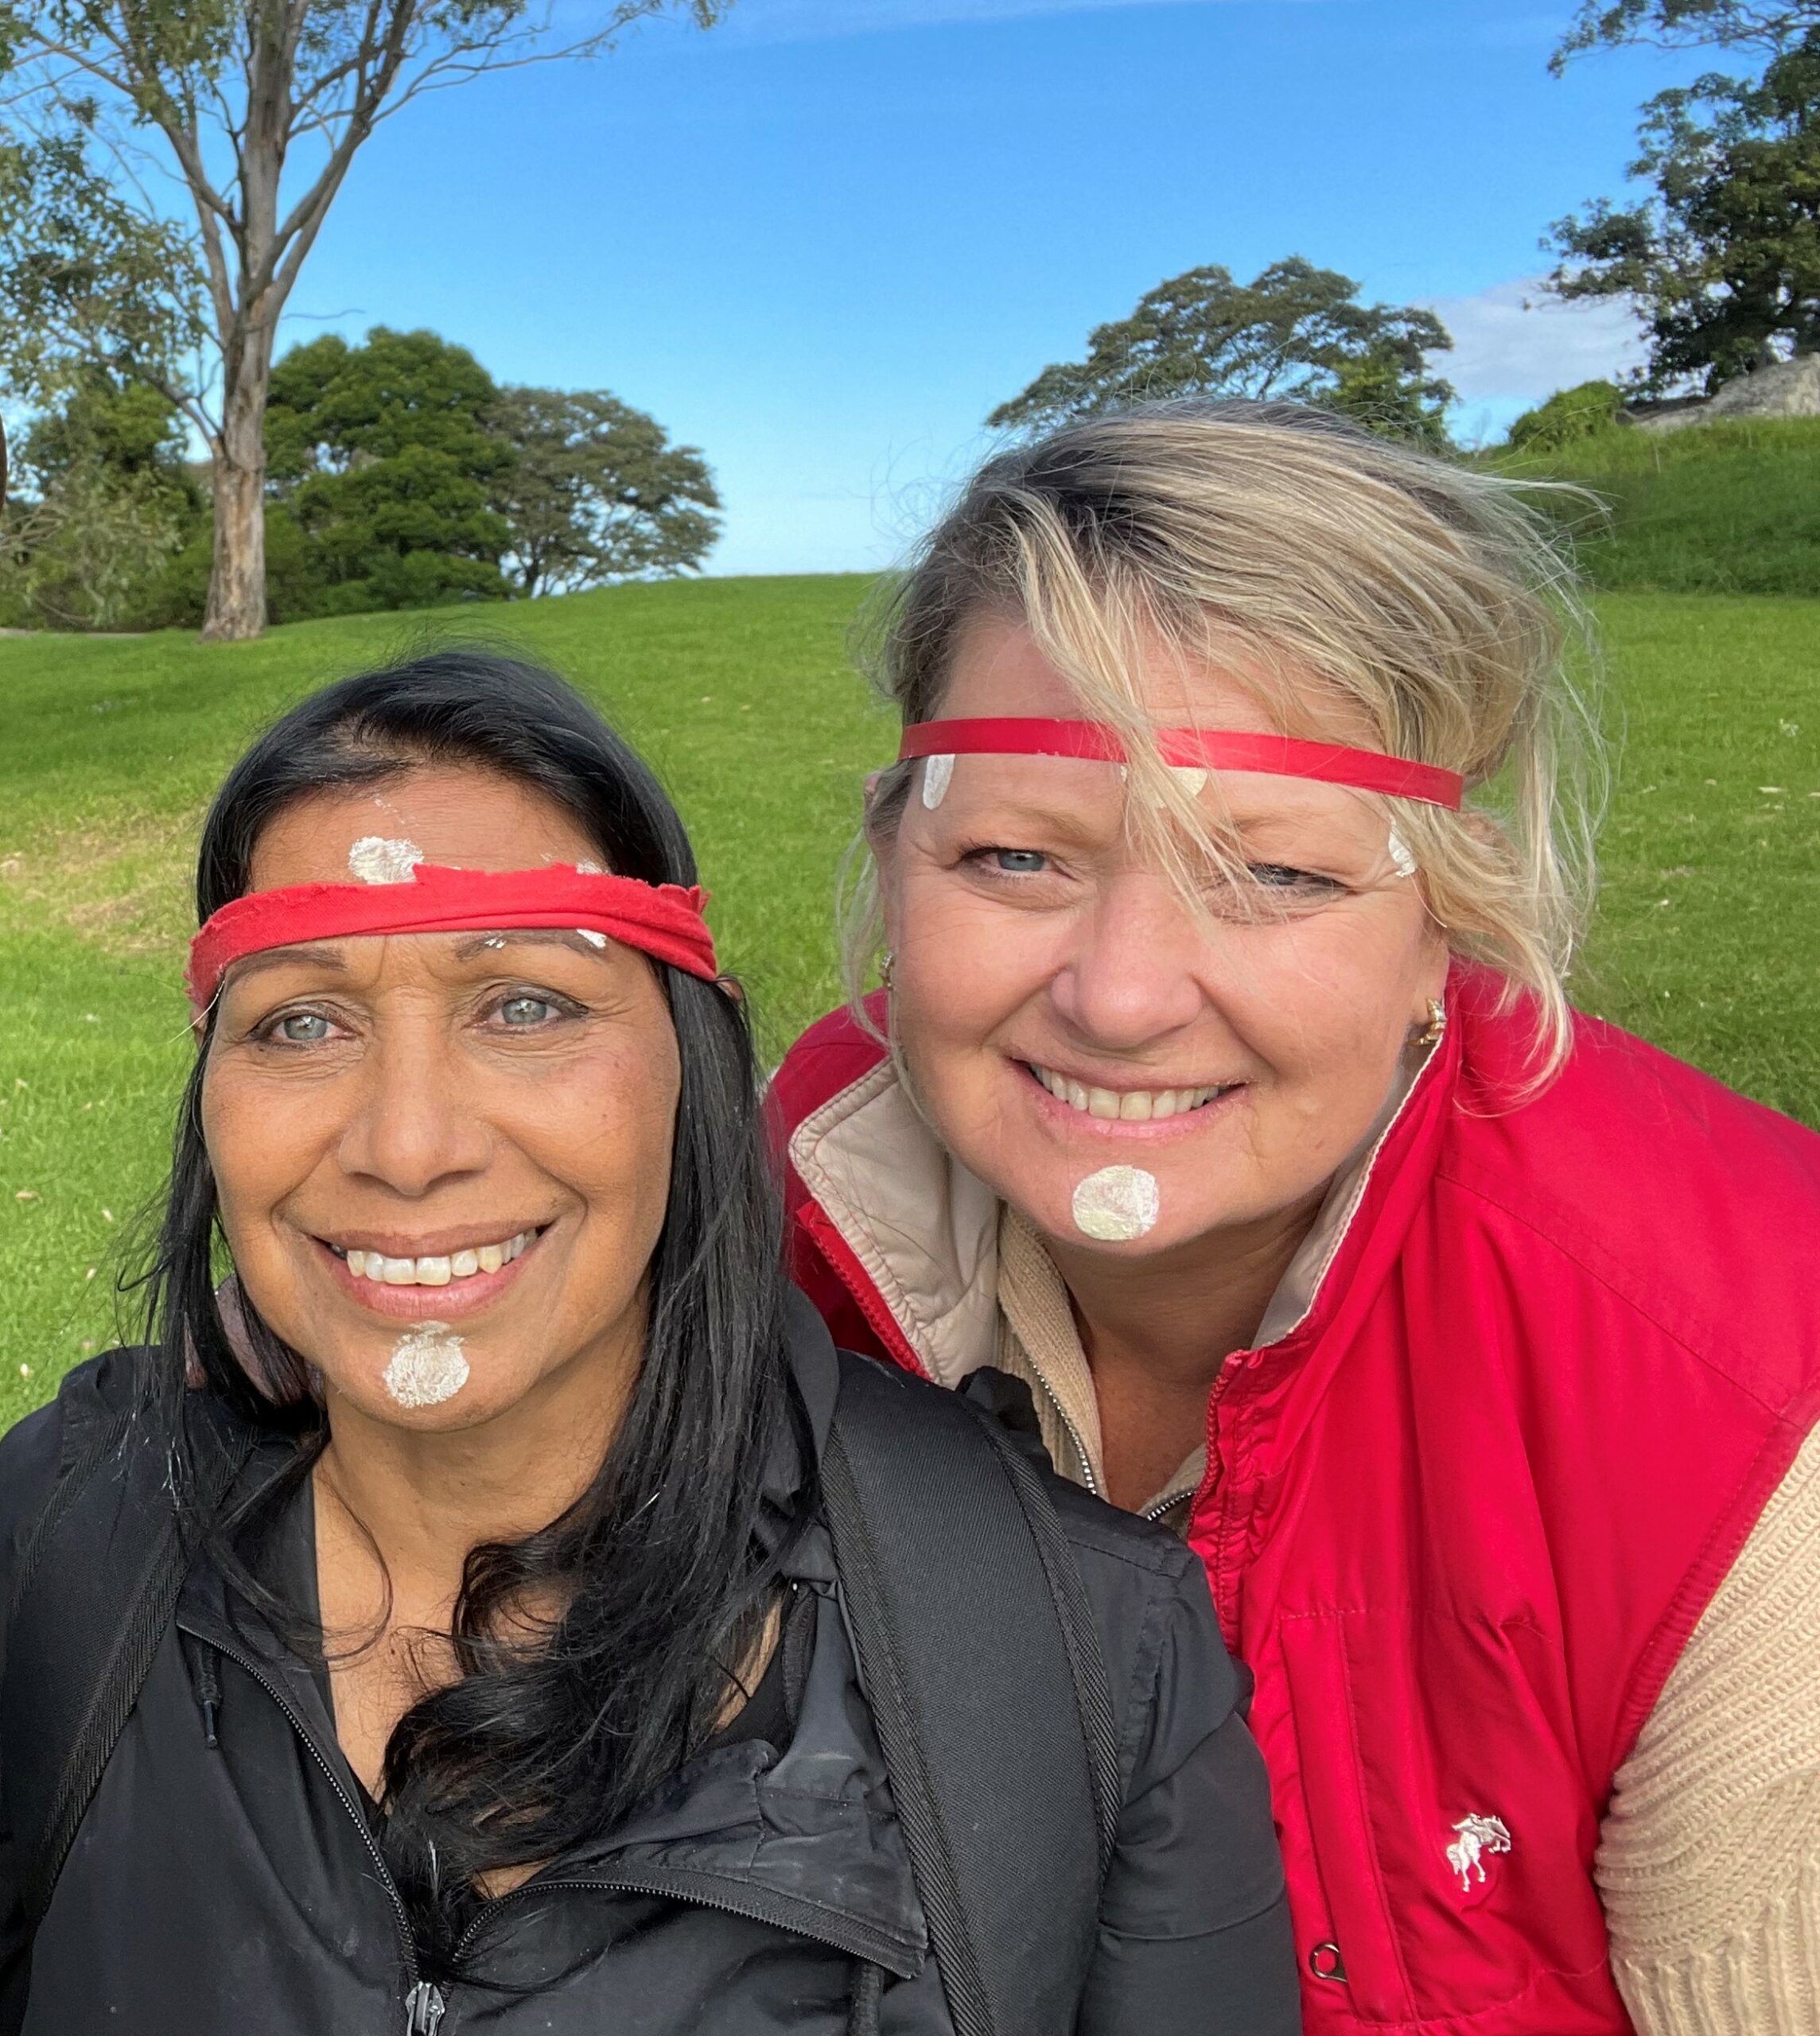 CONNECT TO COUNTRY (Jan 6) - BELLBROOK LOOP WALK CULTURAL WALK WITH ABORIGINAL TRADITIONAL OWNER  LYNNE THOMAS FROM MALLEEMA ABORIGINAL CULTURAL TOURS